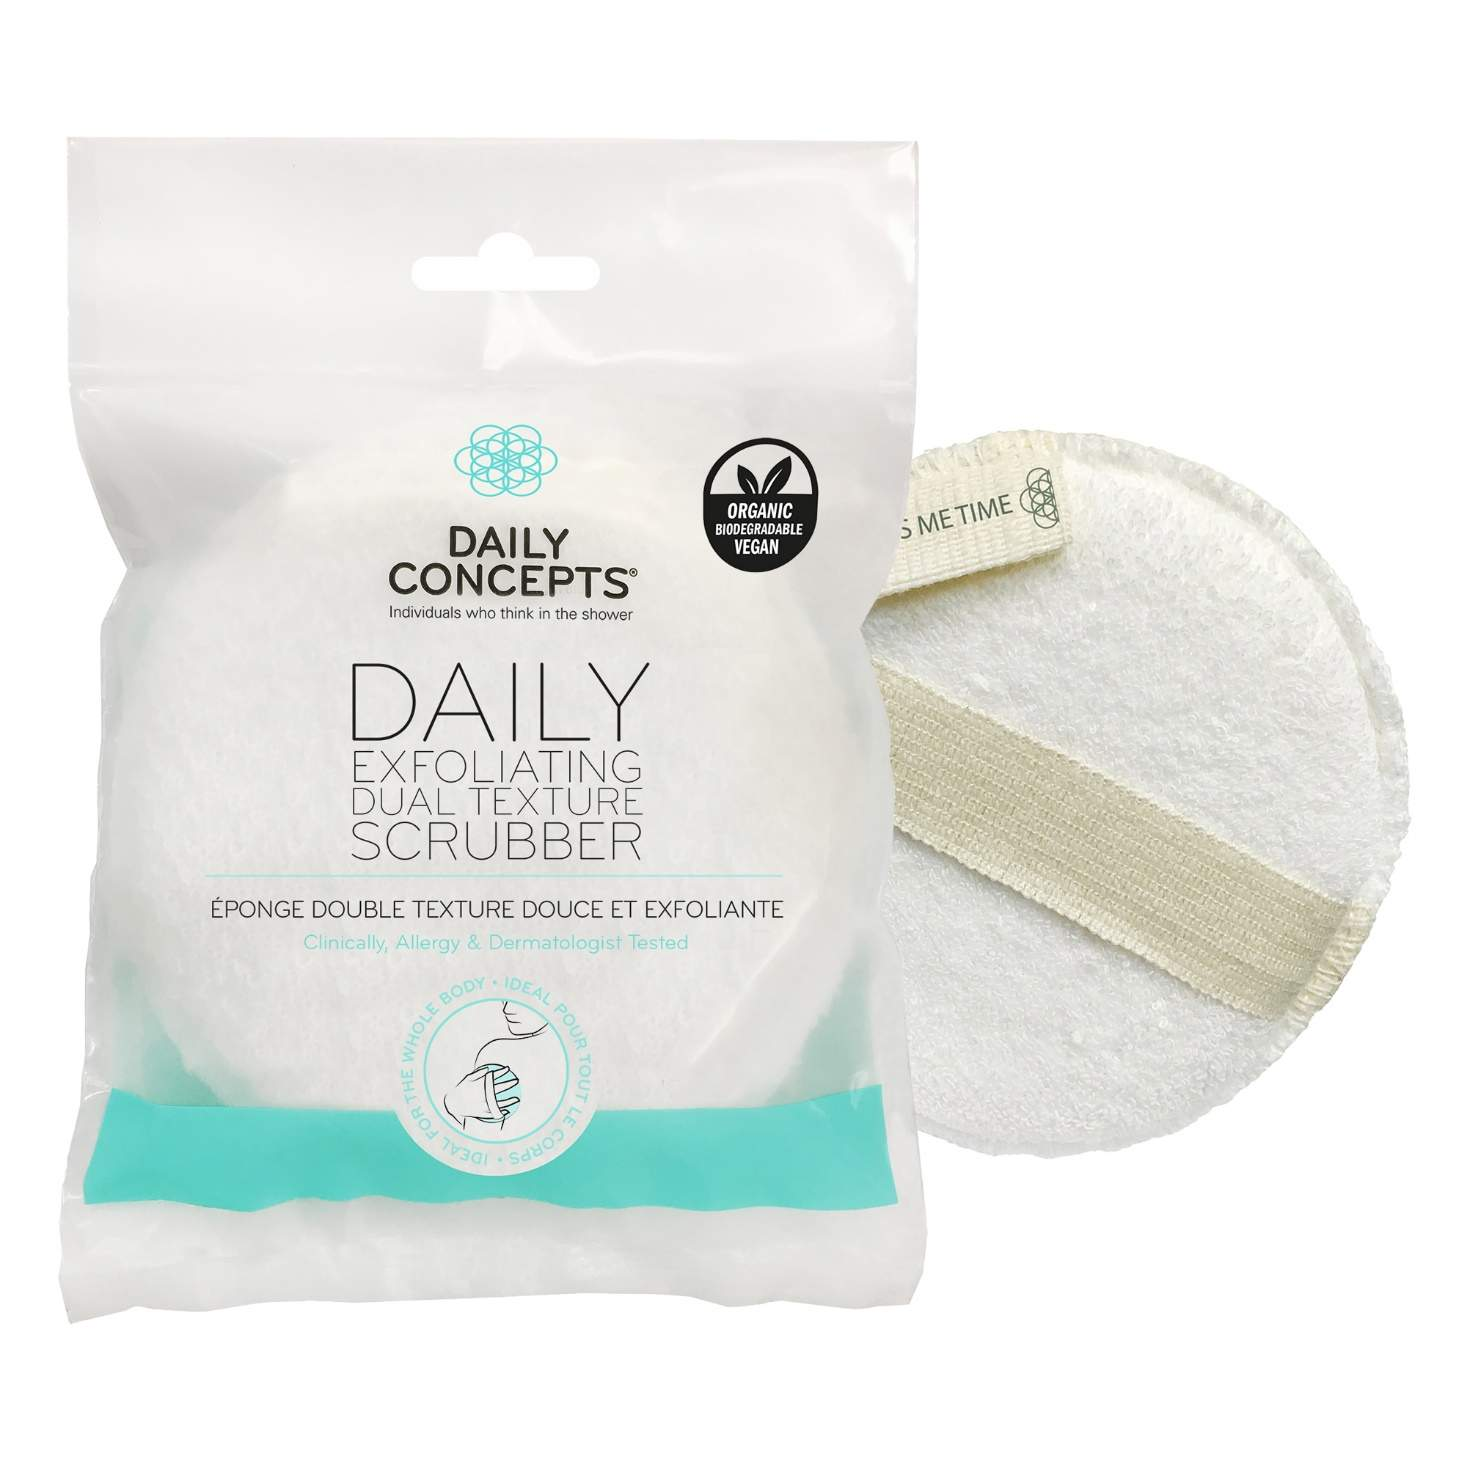 Daily Concepts Dual Texture Body Scrubber